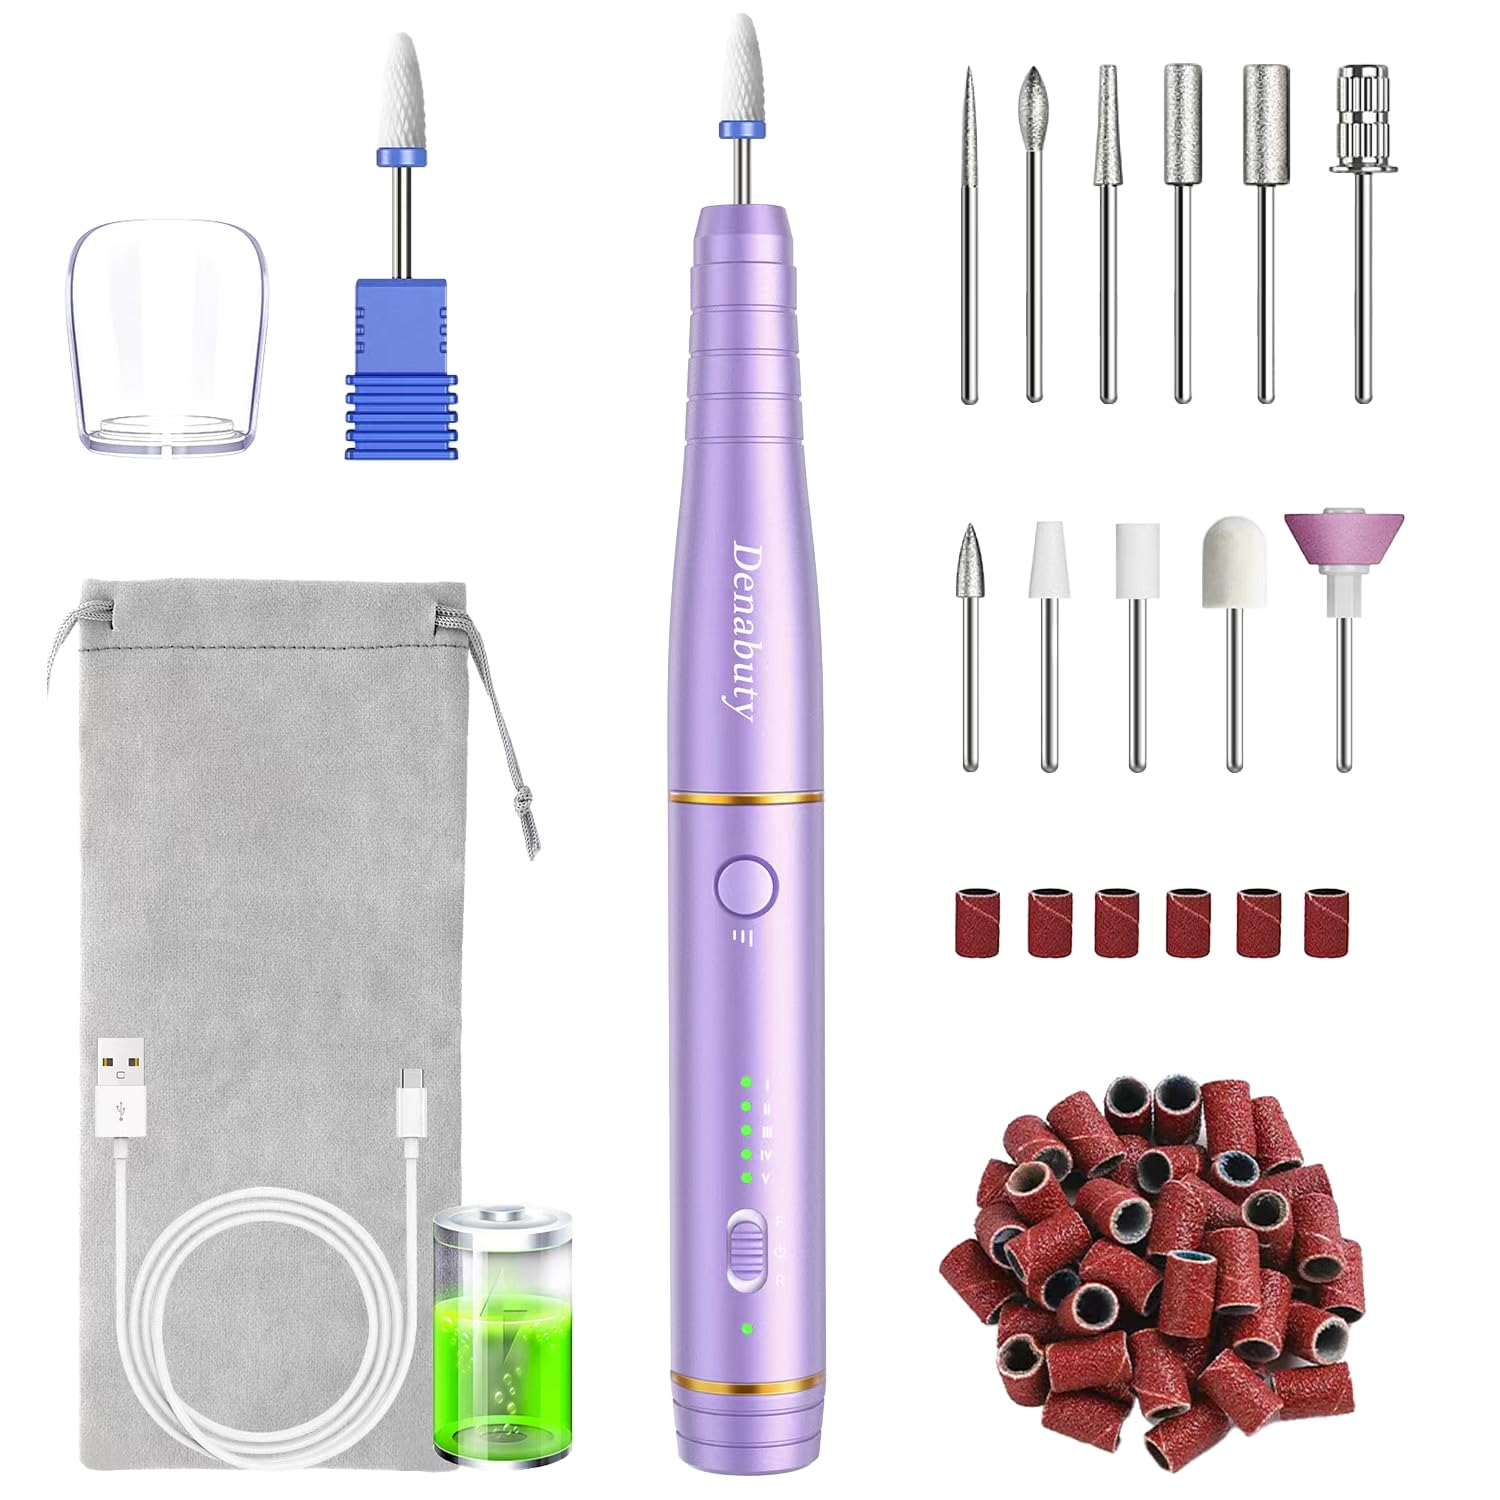 Nail Cutter for Gel Nails, Denabuty Electric Nail File Wireless, 12-in-1 Manicure and Pedicure Set for Acrylic Nails, Nail Shapes, Callus, Shellac Cuticles, USB Rechargeable Nail Drill DN-2302